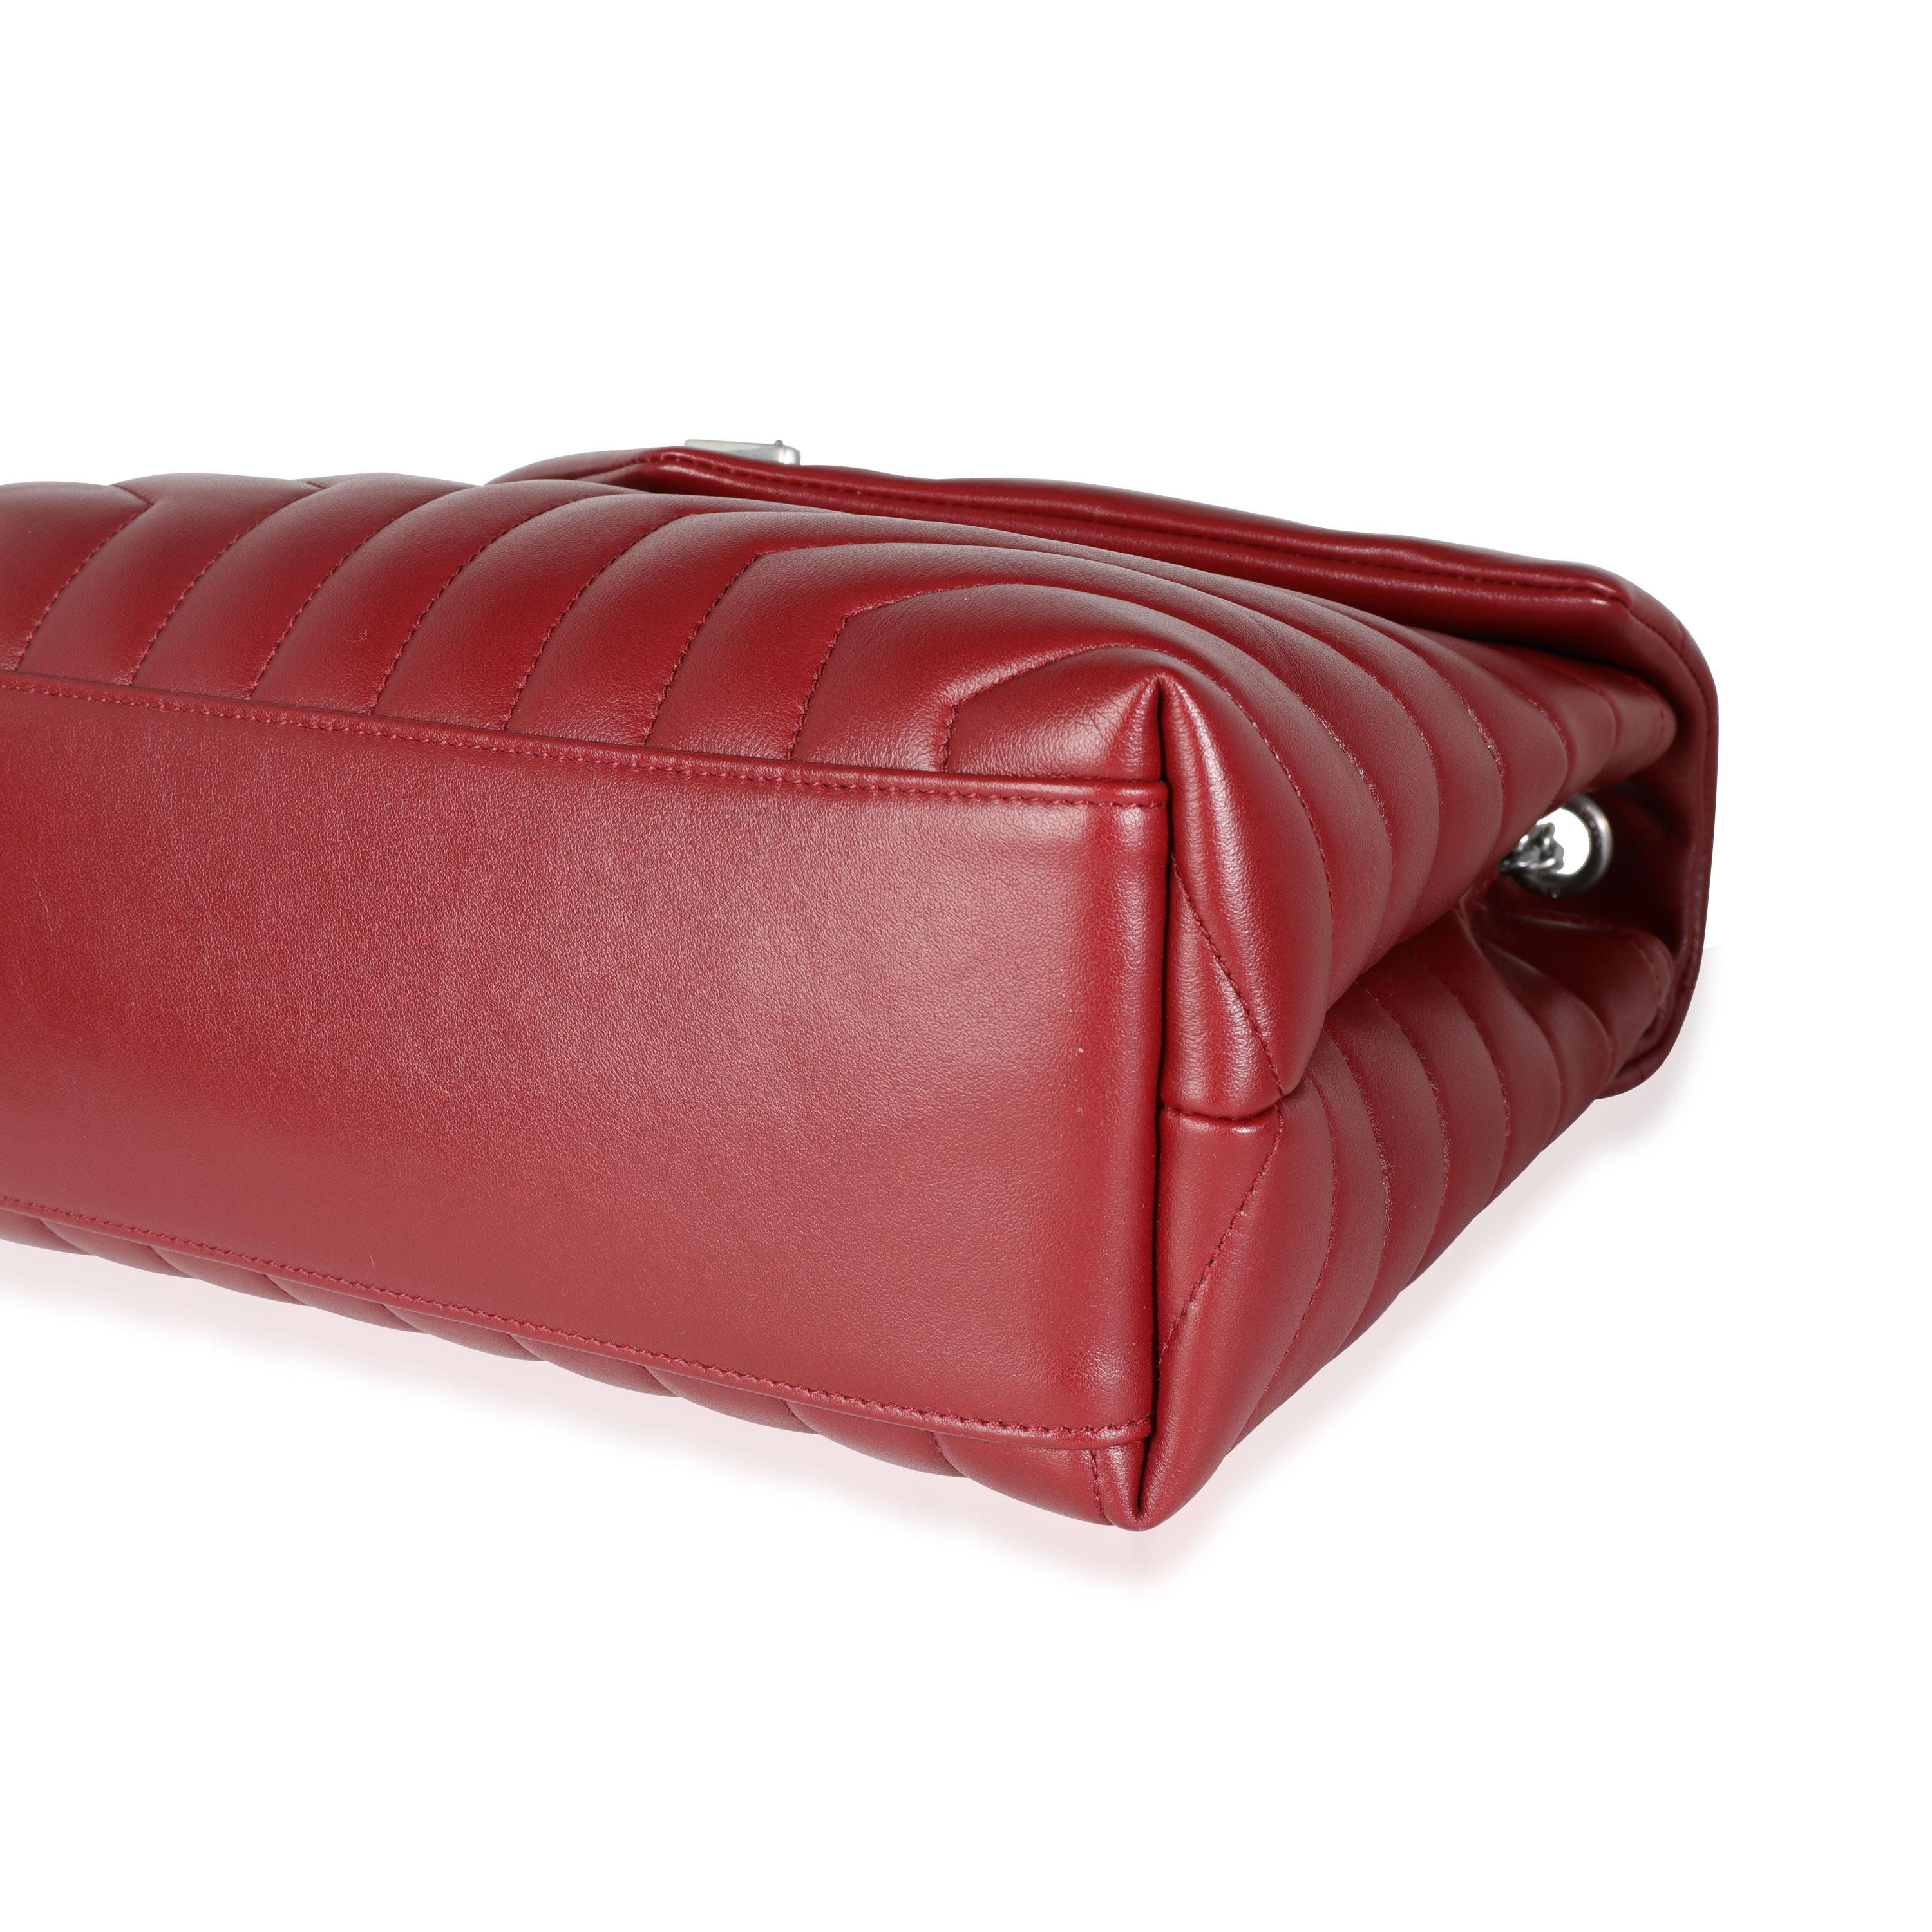 Saint Laurent Burgundy Matelassé Y Leather Medium Loulou Bag In Excellent Condition In New York, NY